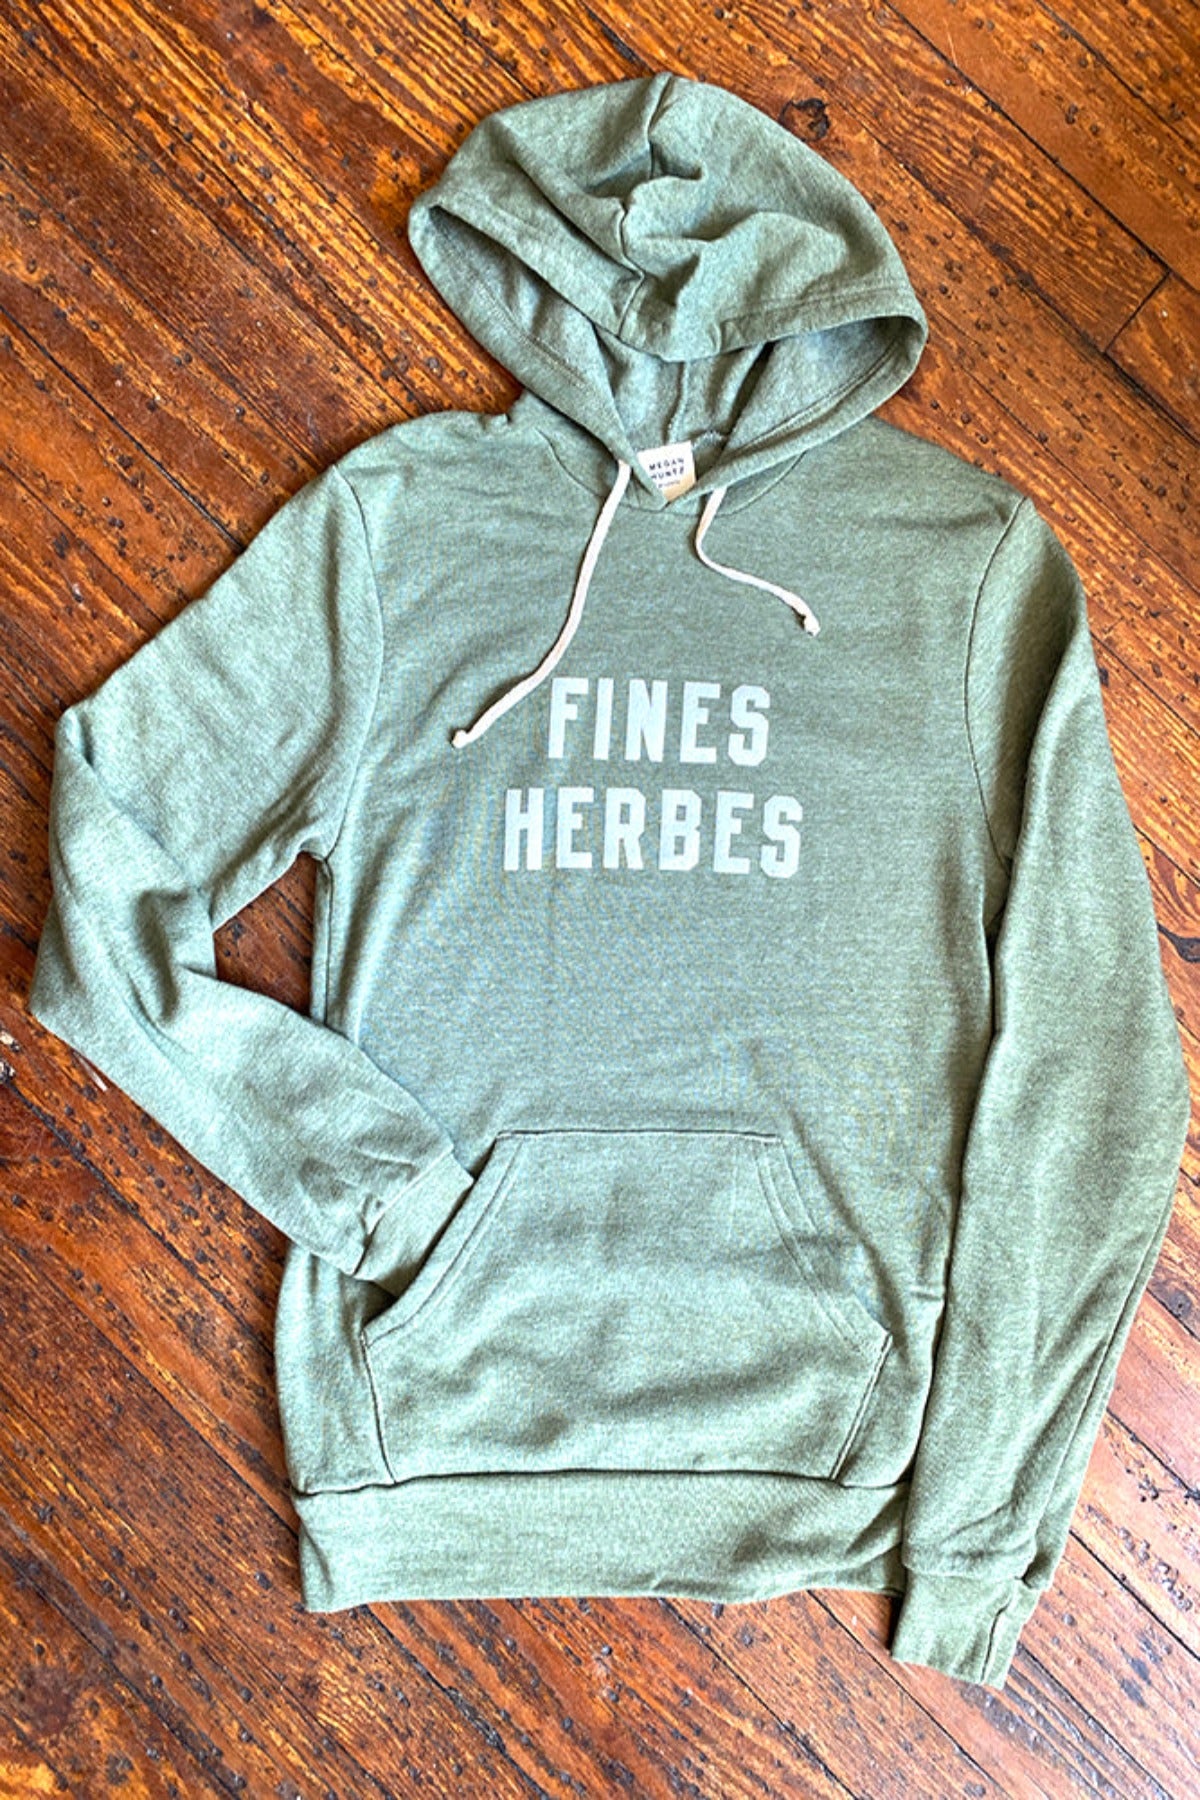 Fines Herbes Eco Fleece Hoodie Sweatshirt in Sage Green. Made in Atlanta, ethically and sustainably, by slow fashion designer Megan Huntz. 